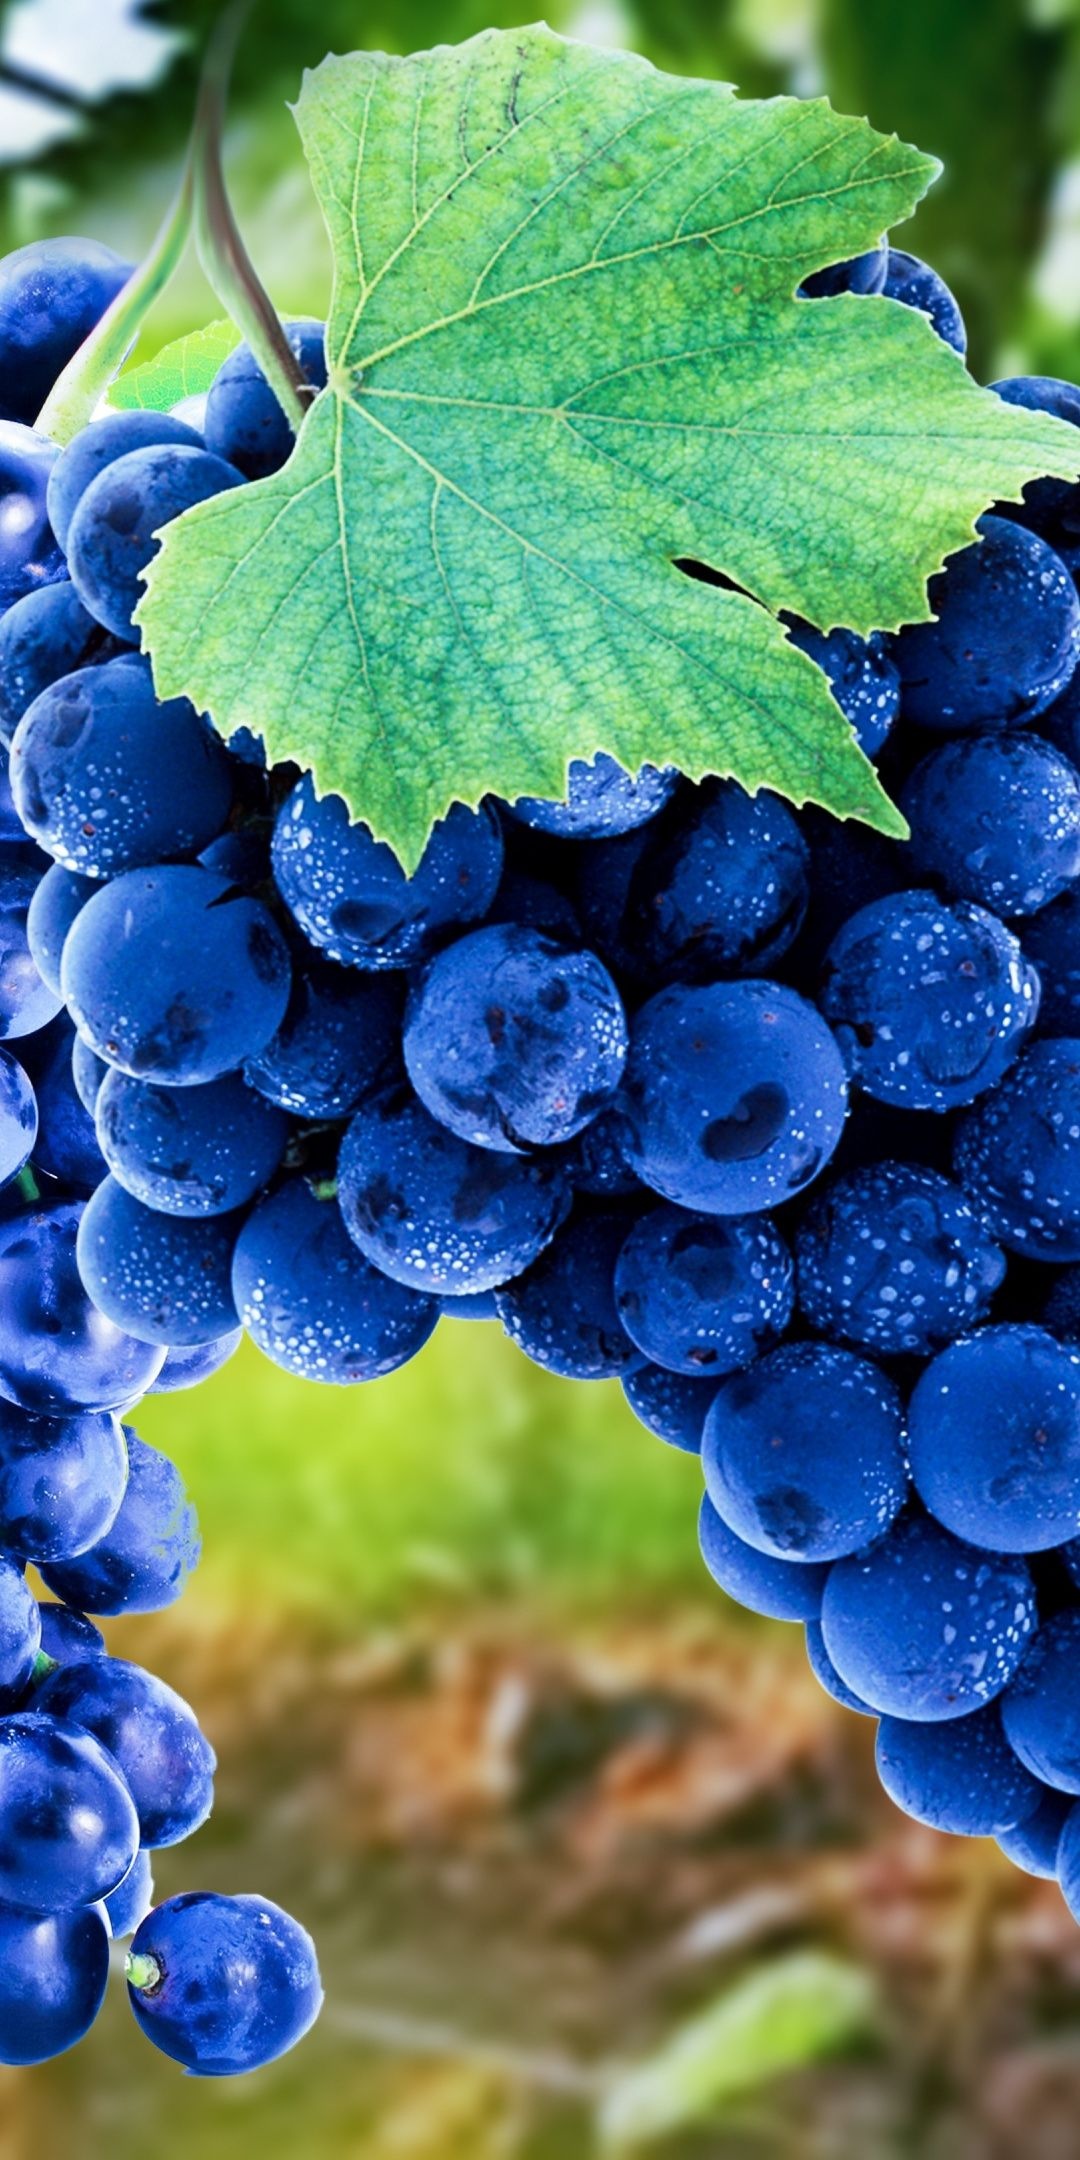 Grapes: Contains a variety of micronutrients such as calcium, iron, magnesium, manganese, phosphorus, potassium, and zinc. 1080x2160 HD Wallpaper.